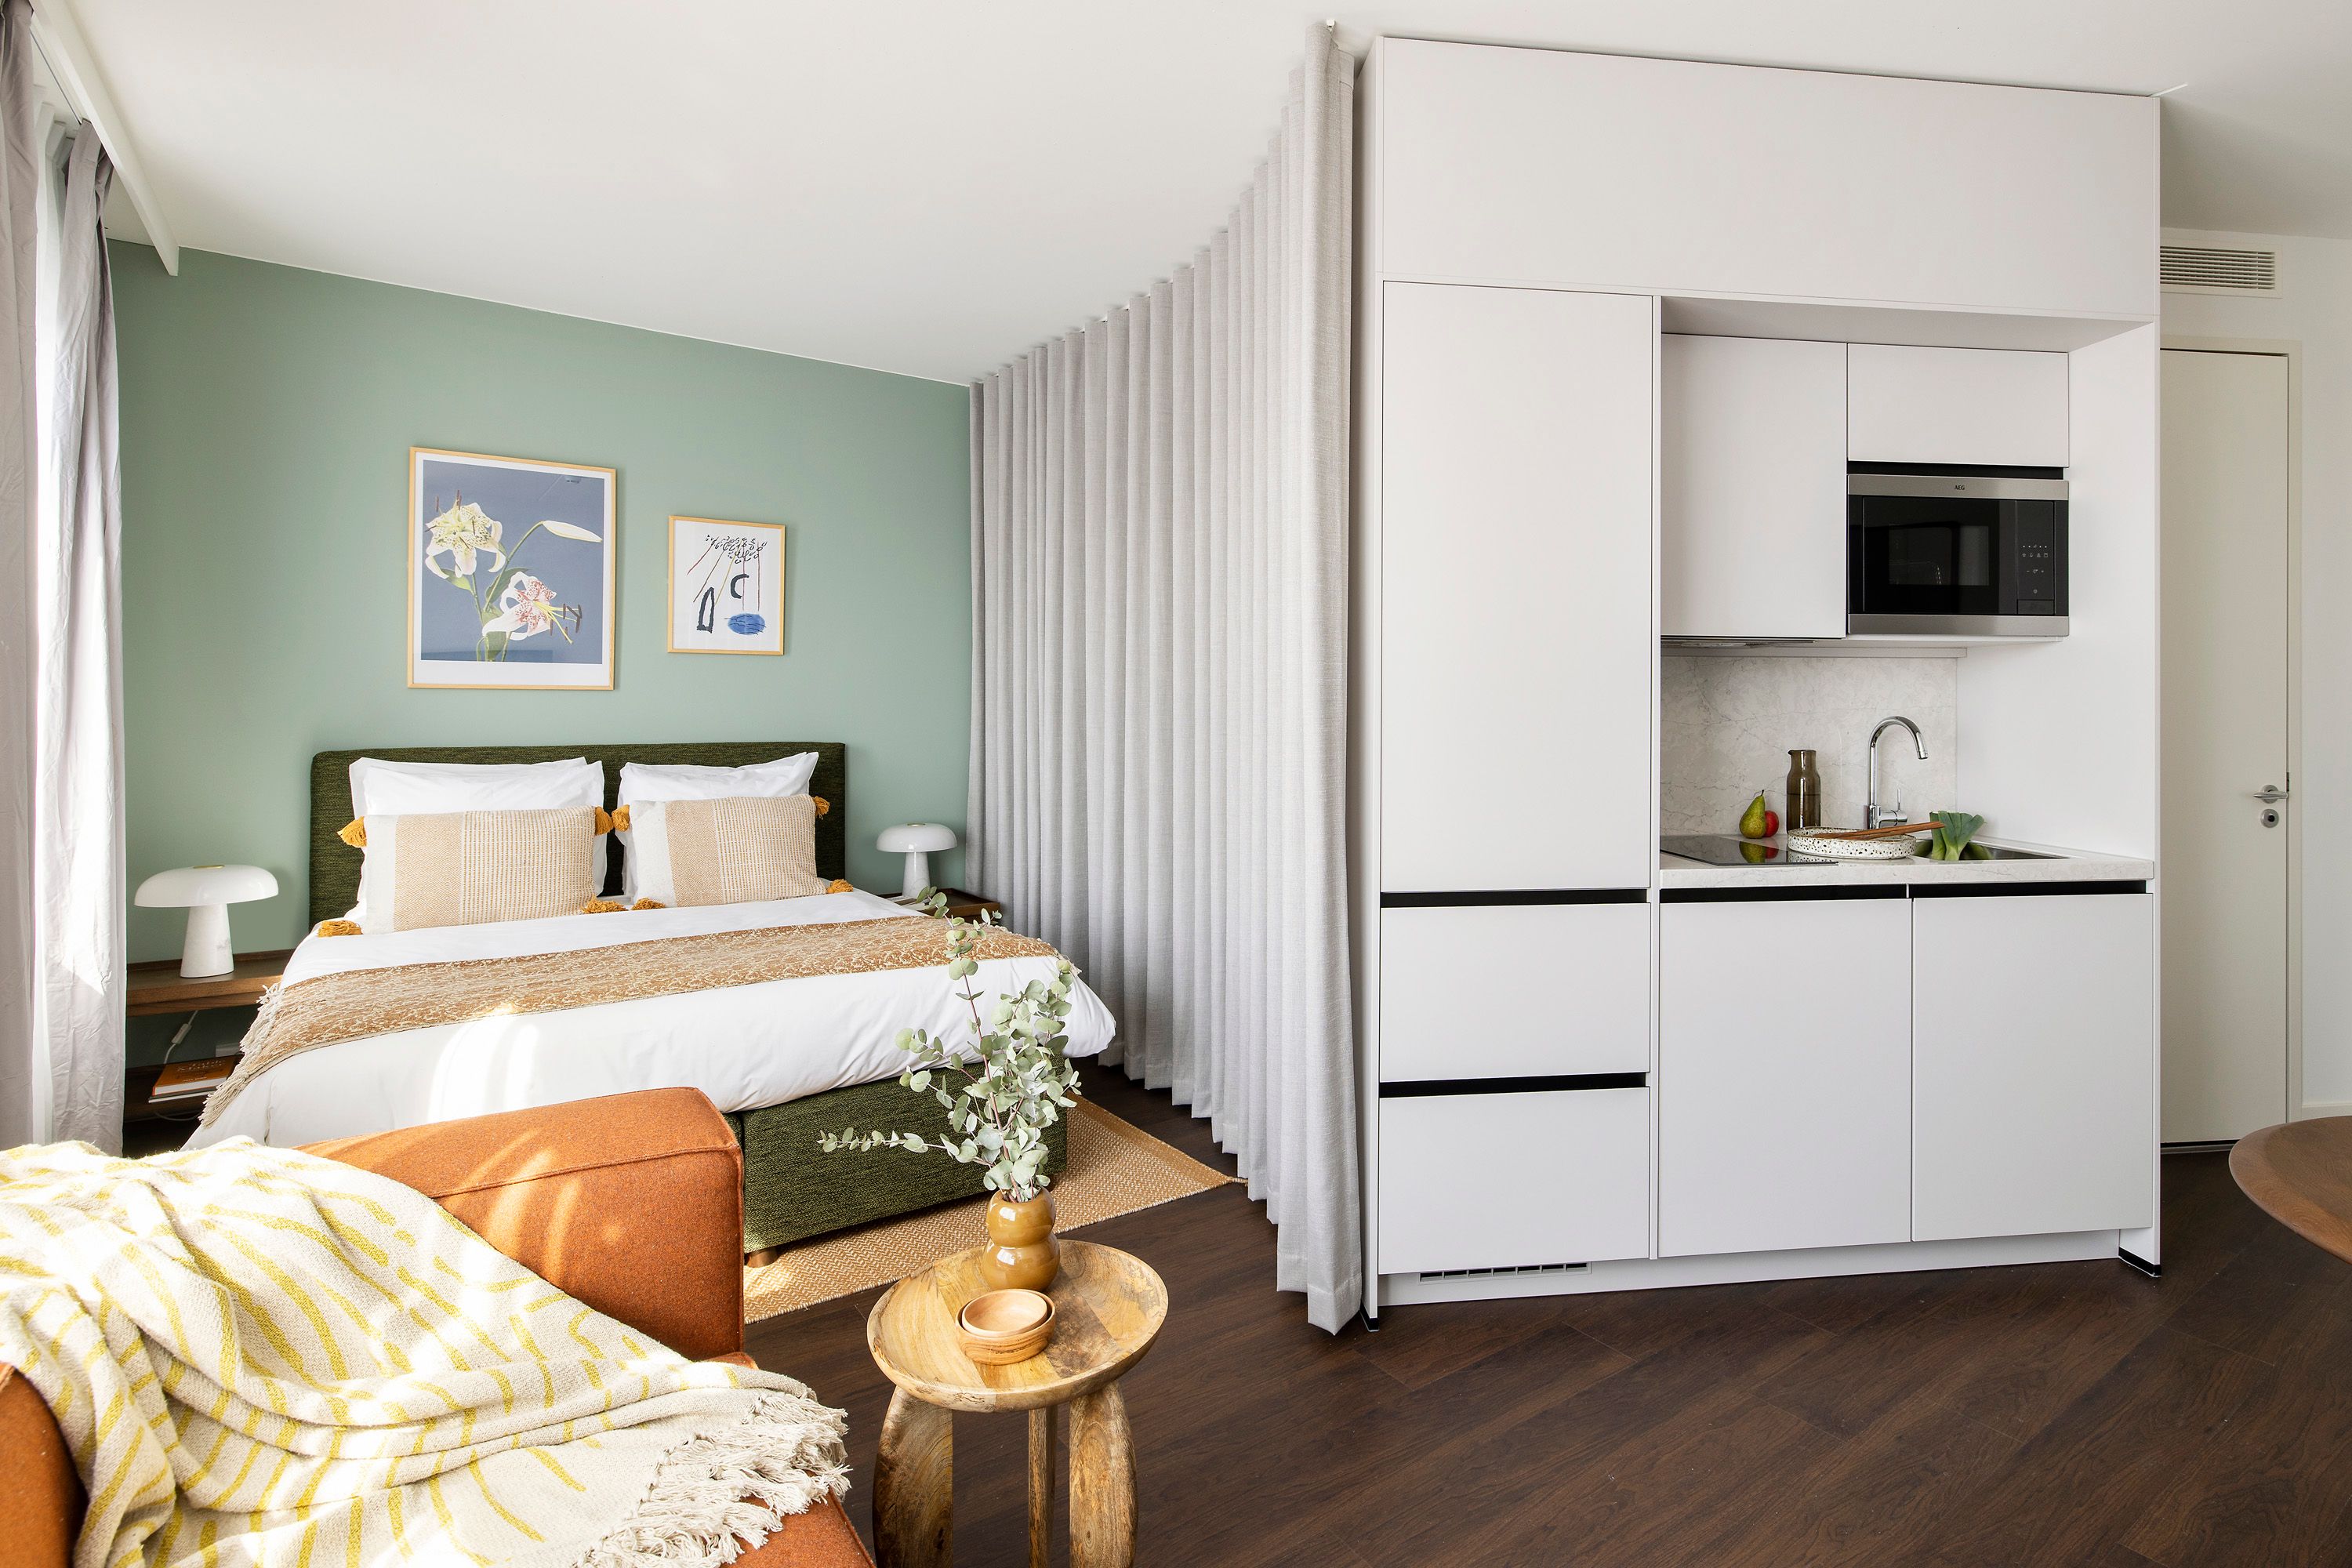 New serviced apartment brand, Cove, opens first Dutch property with the launch of ‘Cove – Centrum’ in the center of The Hague